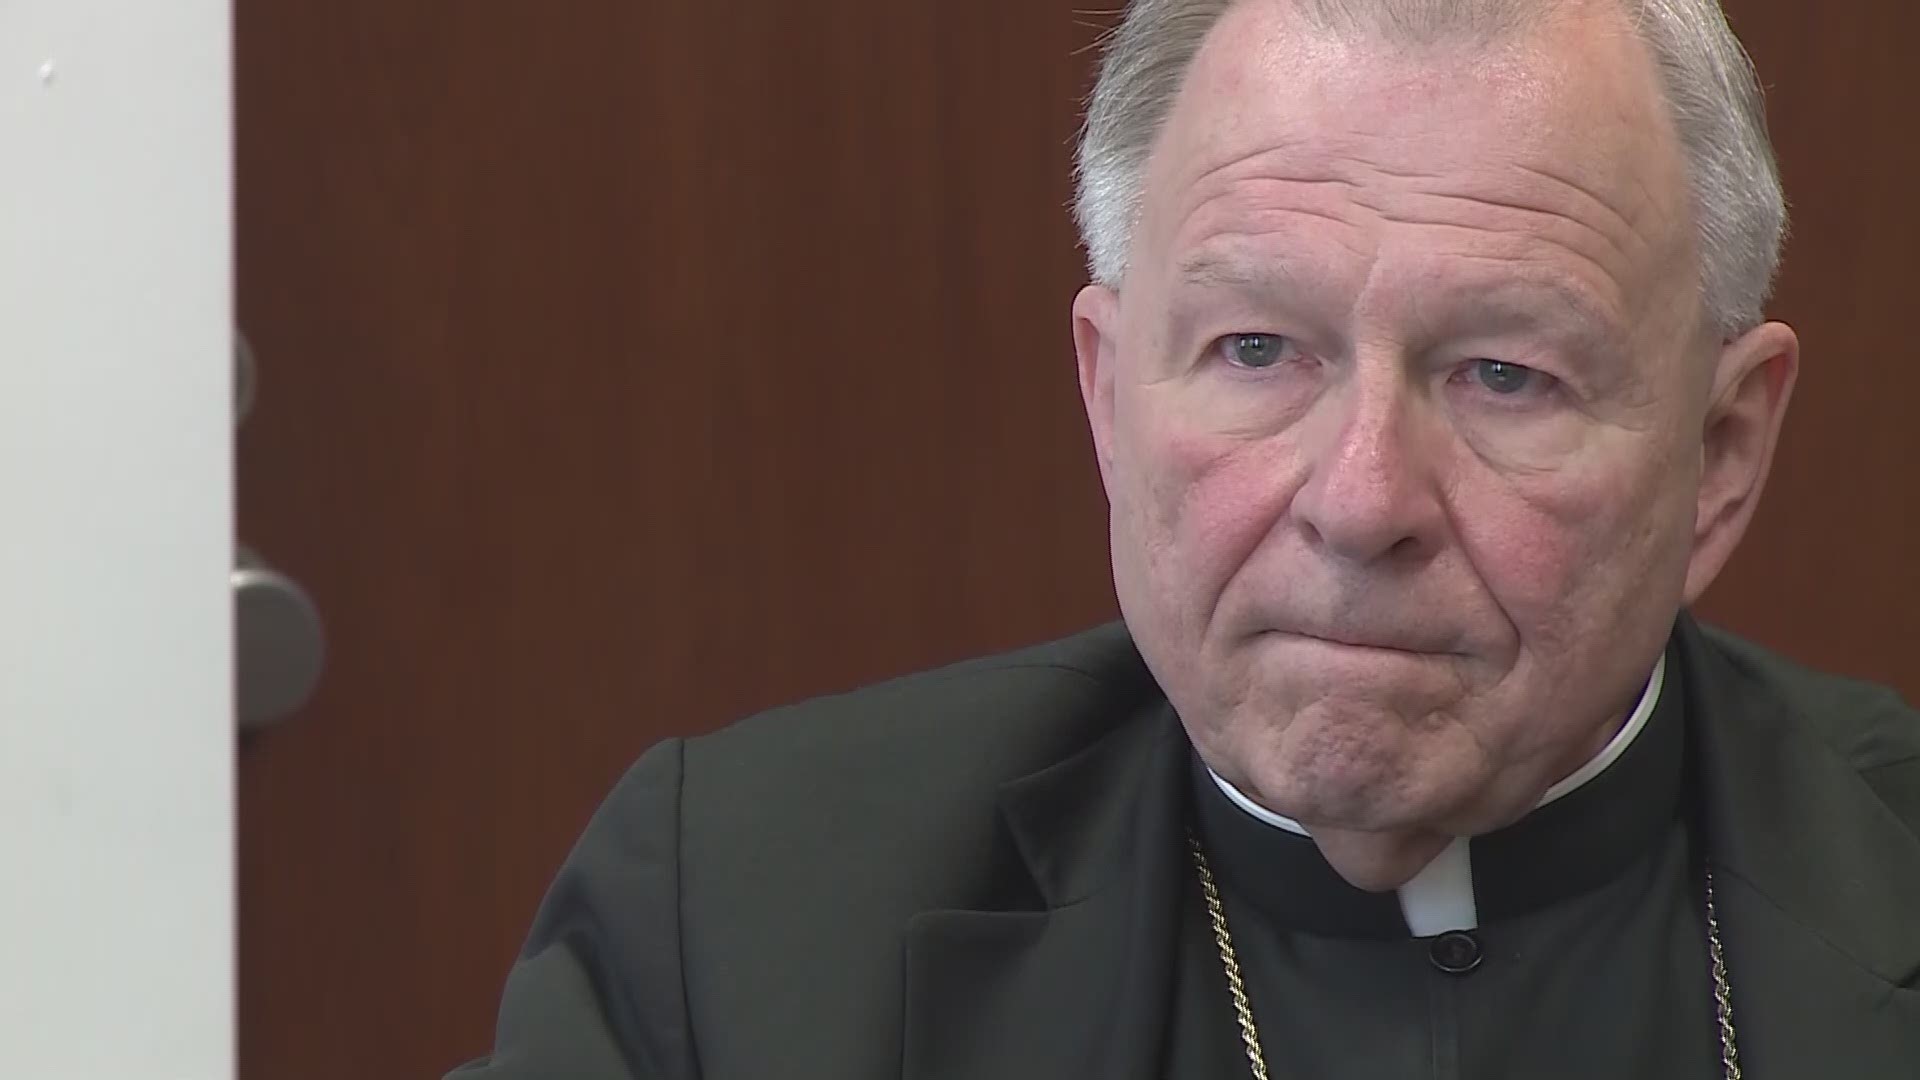 Archbishop Gregory Aymond discusses why he released the names of 57 clergy members in the Archdiocese of New Orleans with substantiated claims of sexual abuse against them.